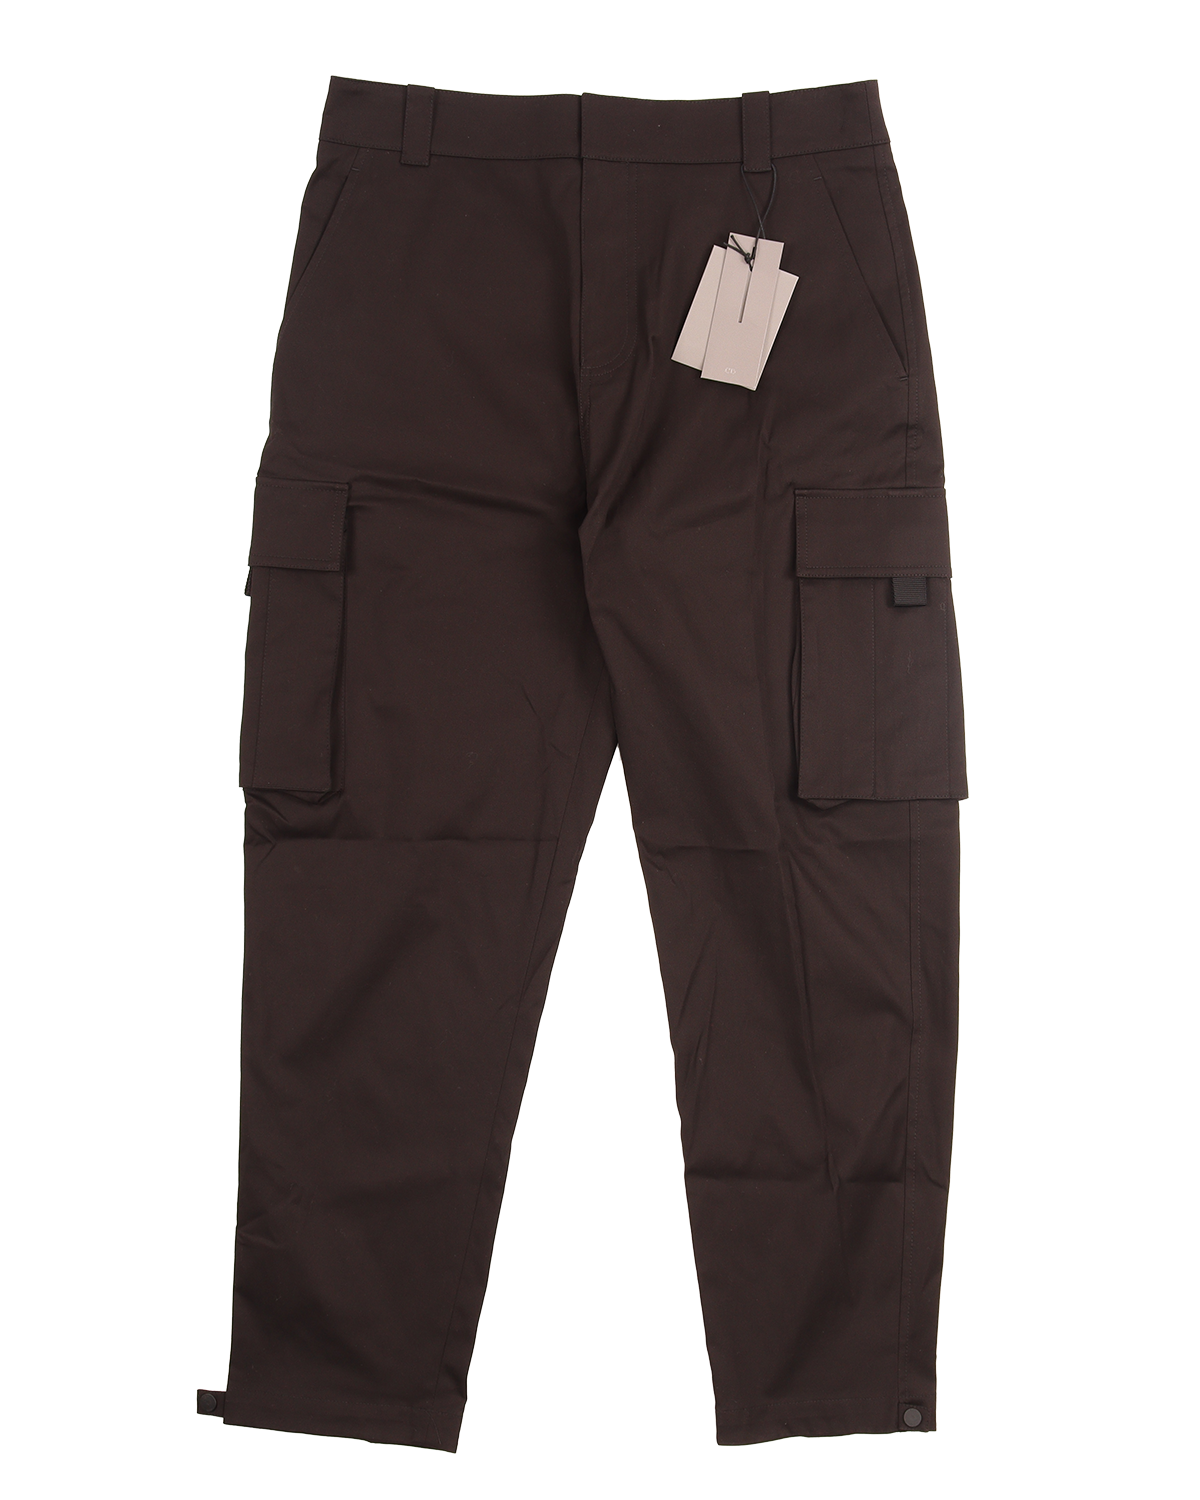 Cargo Pant w/ Tags